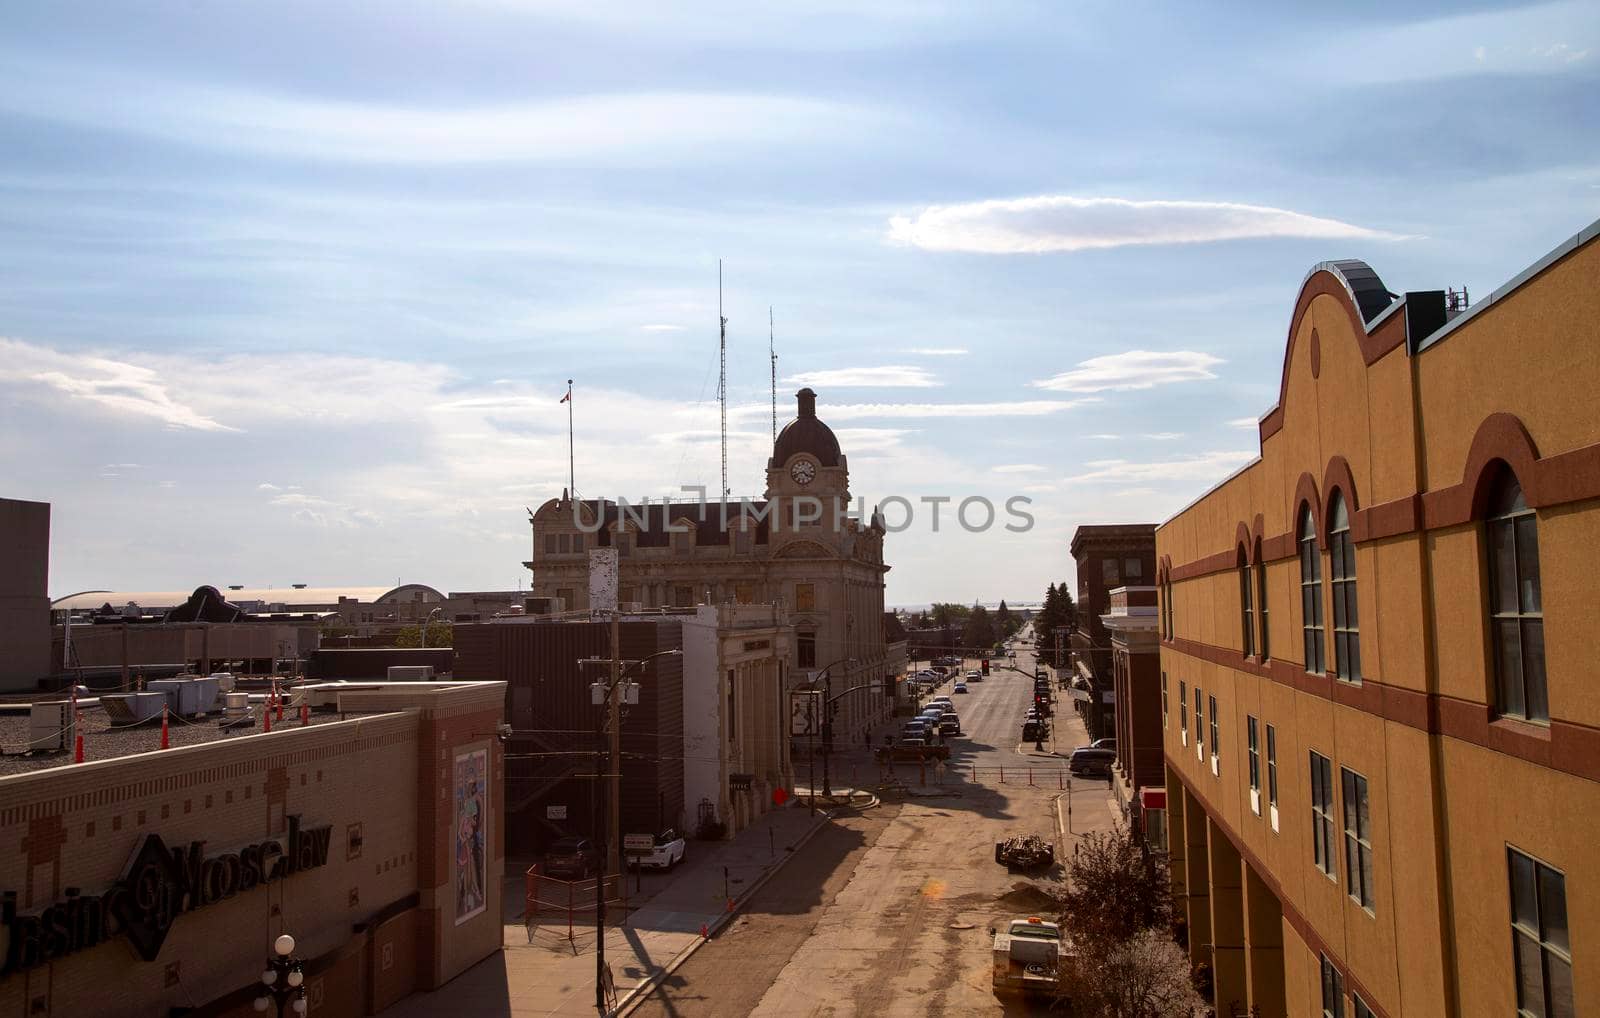 Downtown Moose Jaw by pictureguy